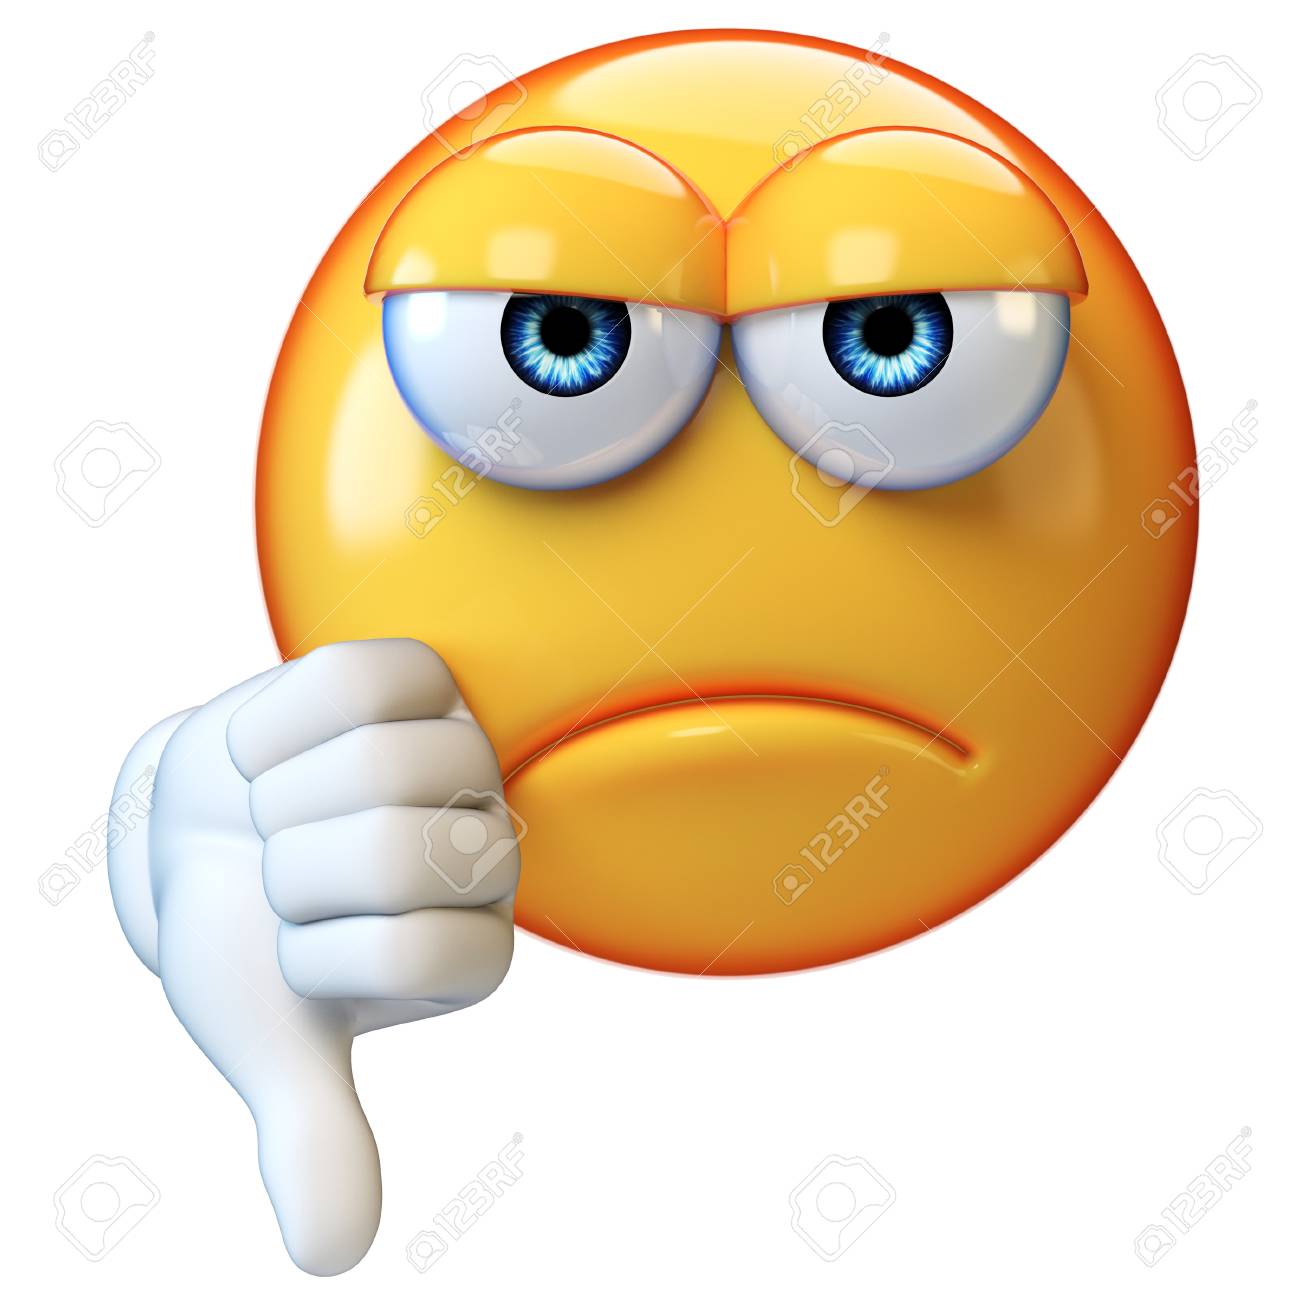 Thumb Down Emoji Isolated On White Background Emoticon Giving